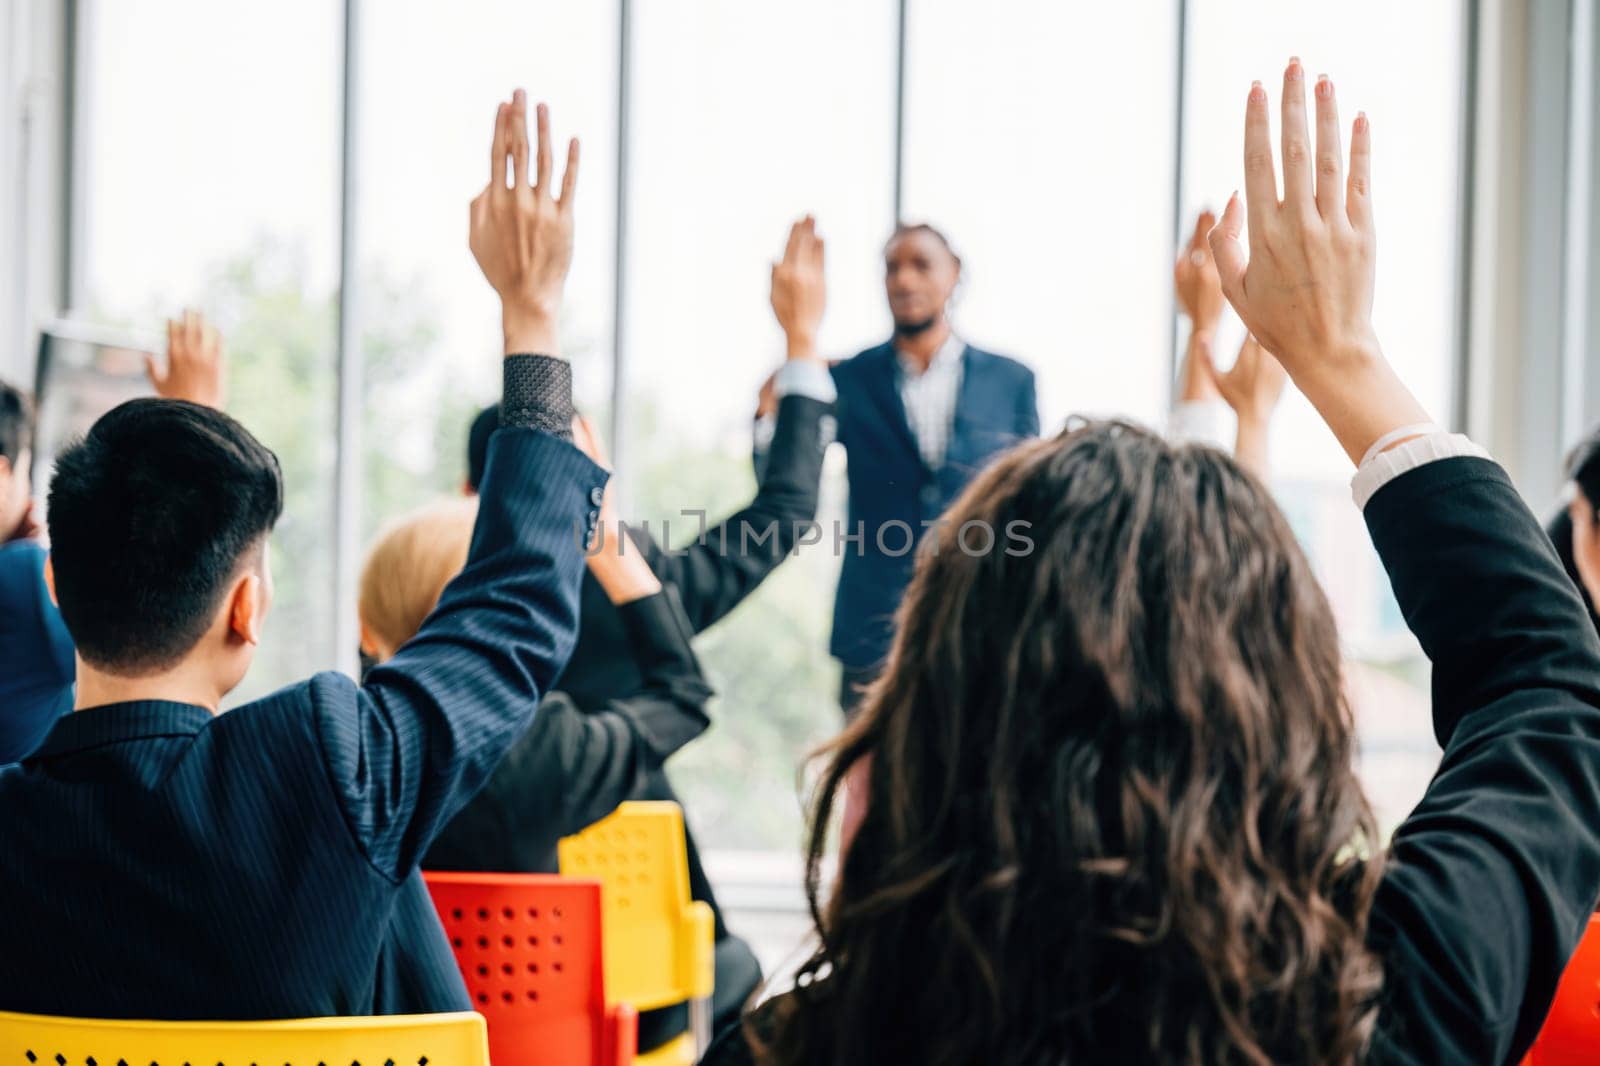 At a corporate event businesspeople engage in a conference and convention. Hands are raised symbolizing questions and active participation in a meeting and training seminar. by Sorapop